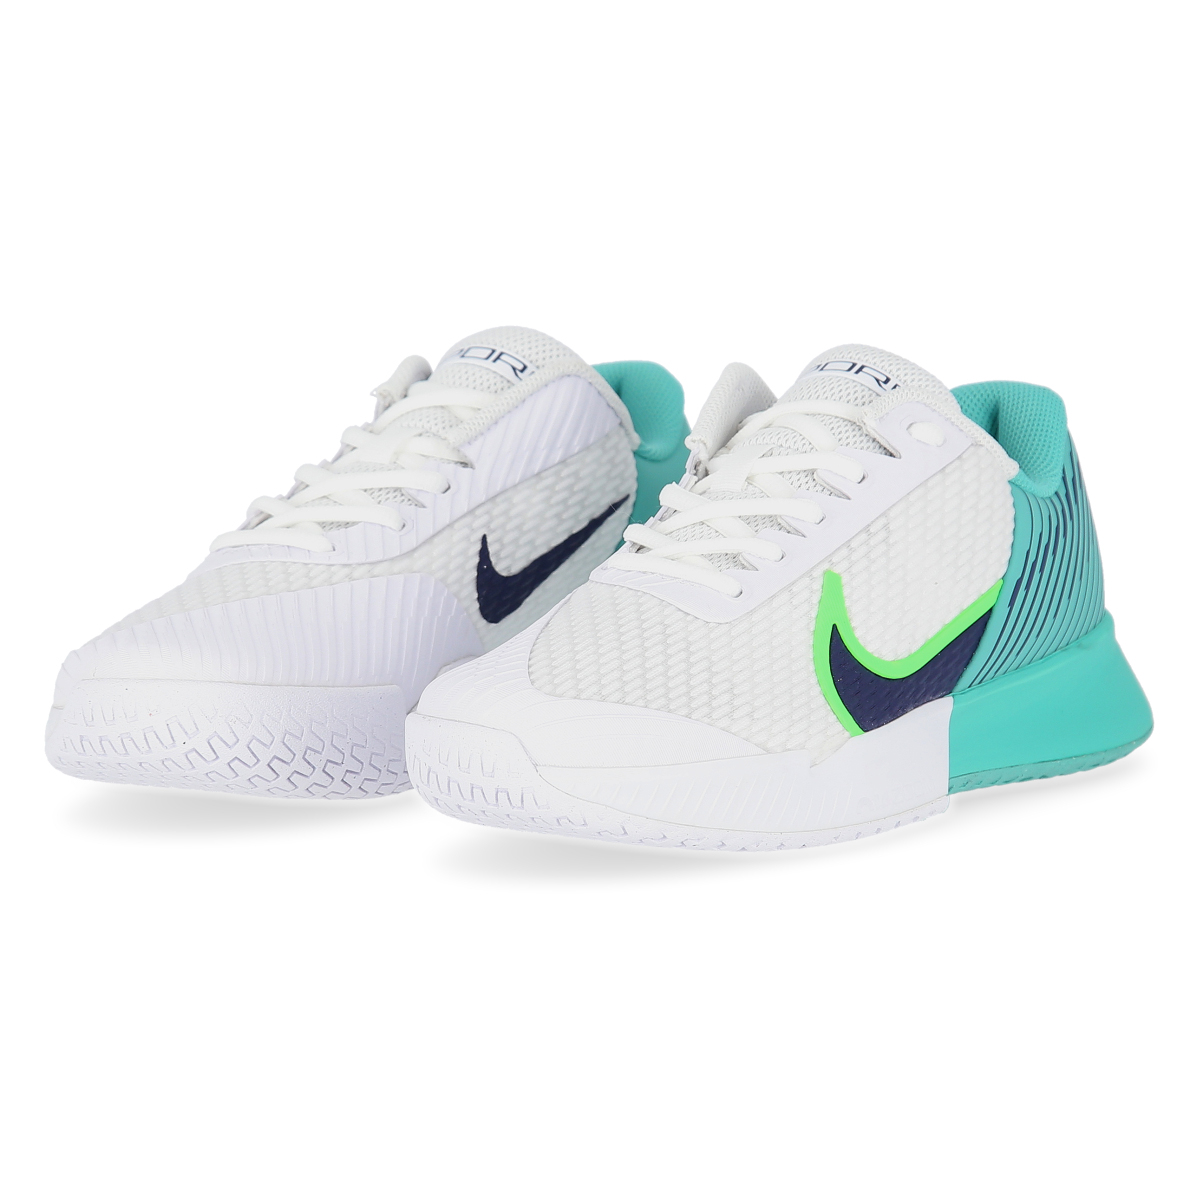 Zapatillas Tenis Nike Court Air Zoom Vapor Pro 2 Hombre,  image number null